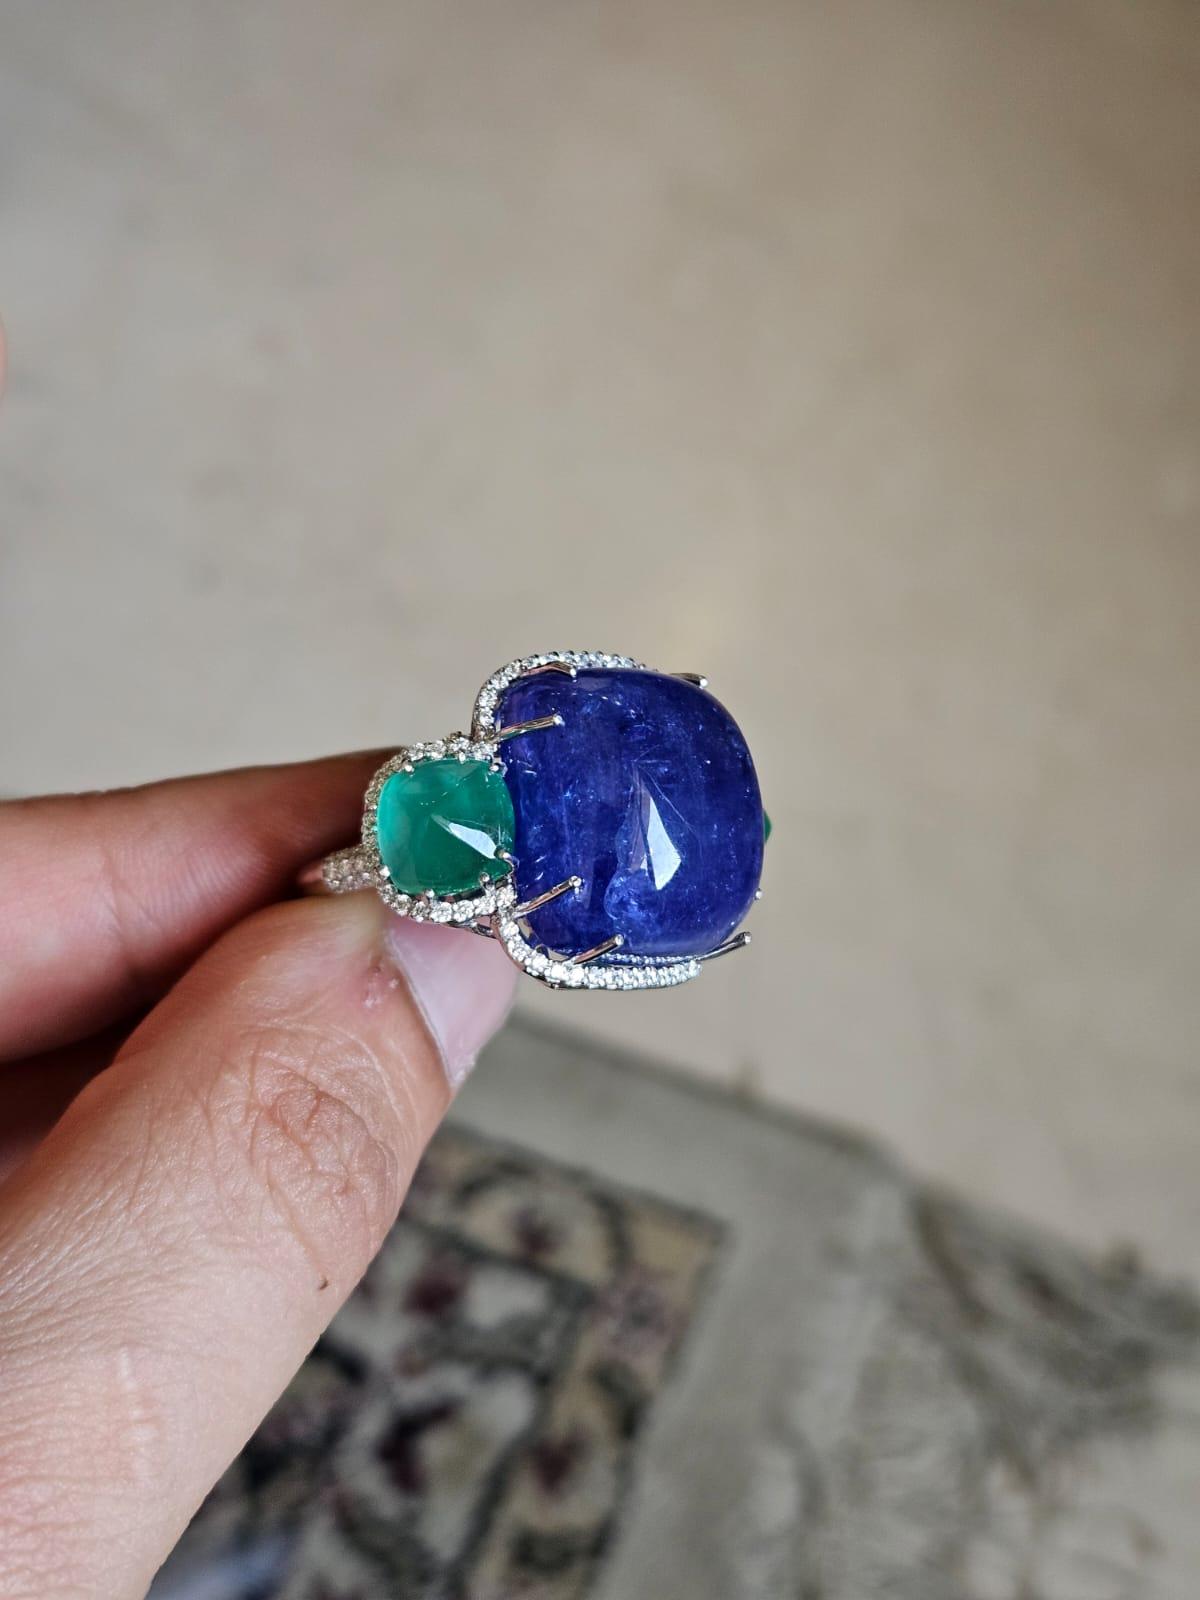 A very gorgeous and beautiful, one of a kind, Tanzanite & Emerald Cocktail Ring set in 18K White Gold & Diamonds. The weight of the Tanzanite Cabochon is 44.23 carats. The Tanzanite is responsibly sourced from Tanzania. The weight of the Emerald